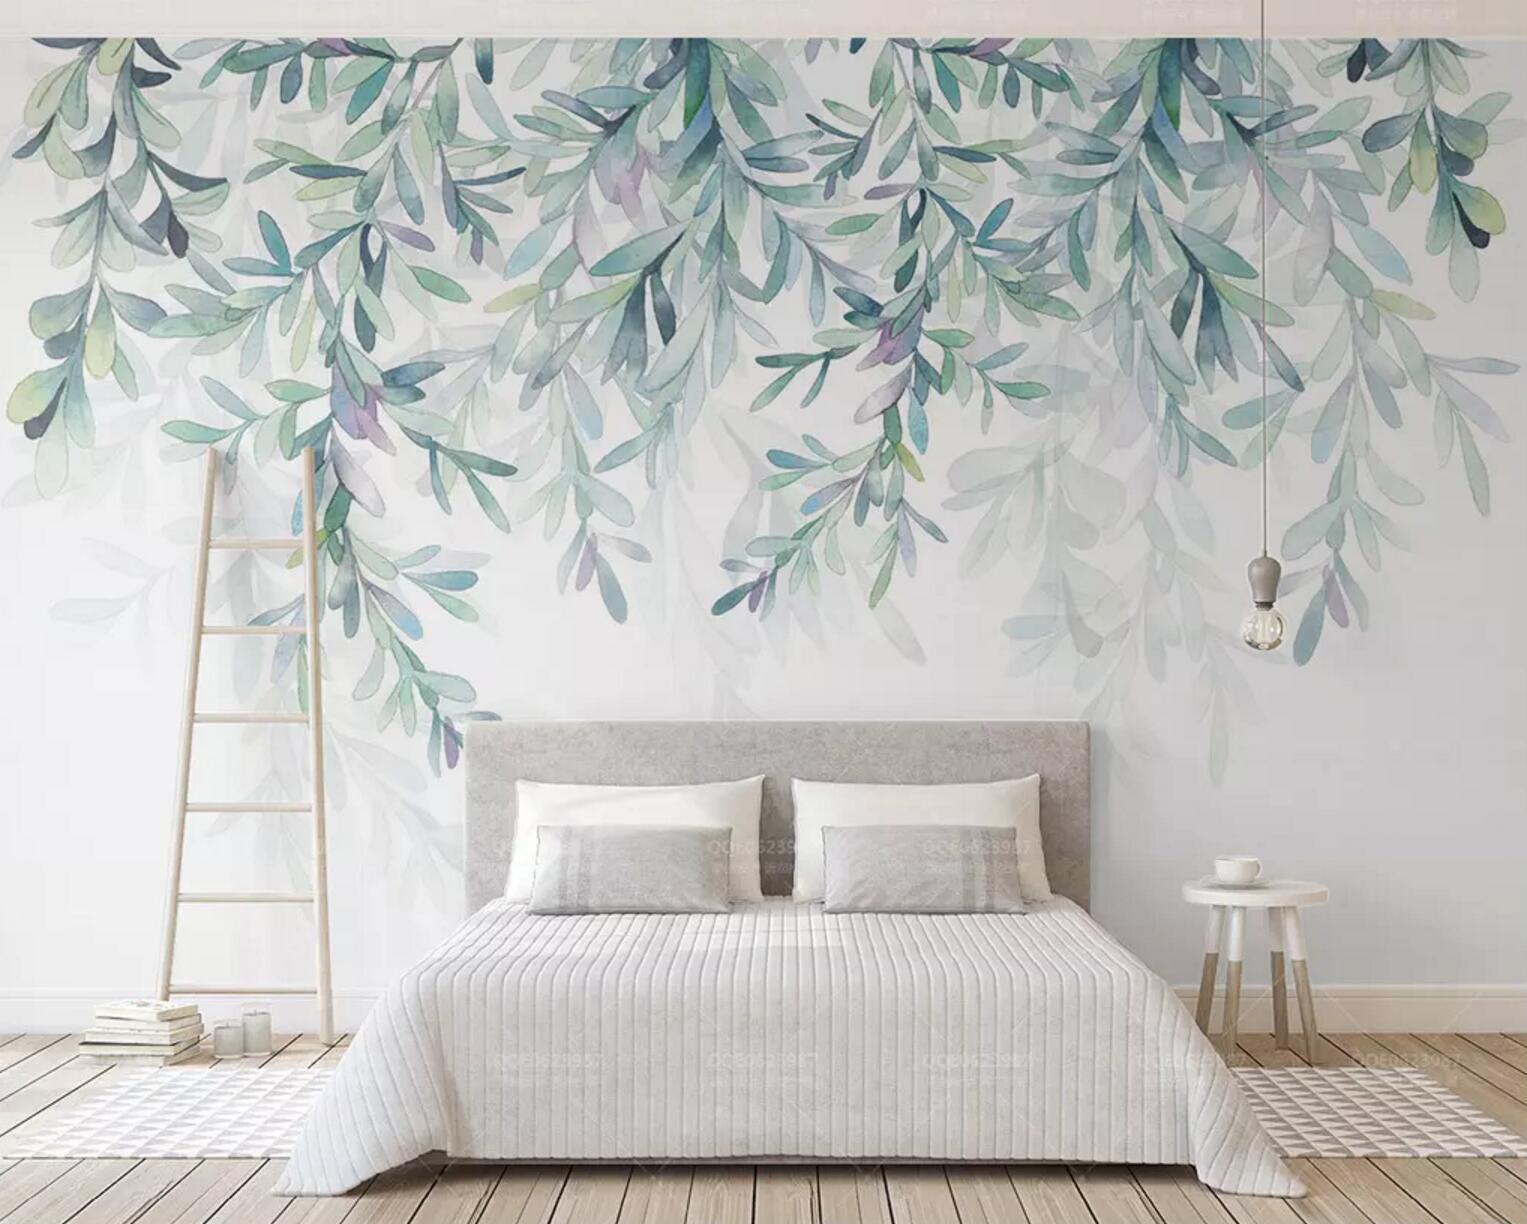 3D Watercolor Partysu Leaves Wall Mural 225- Jess Art Decoration